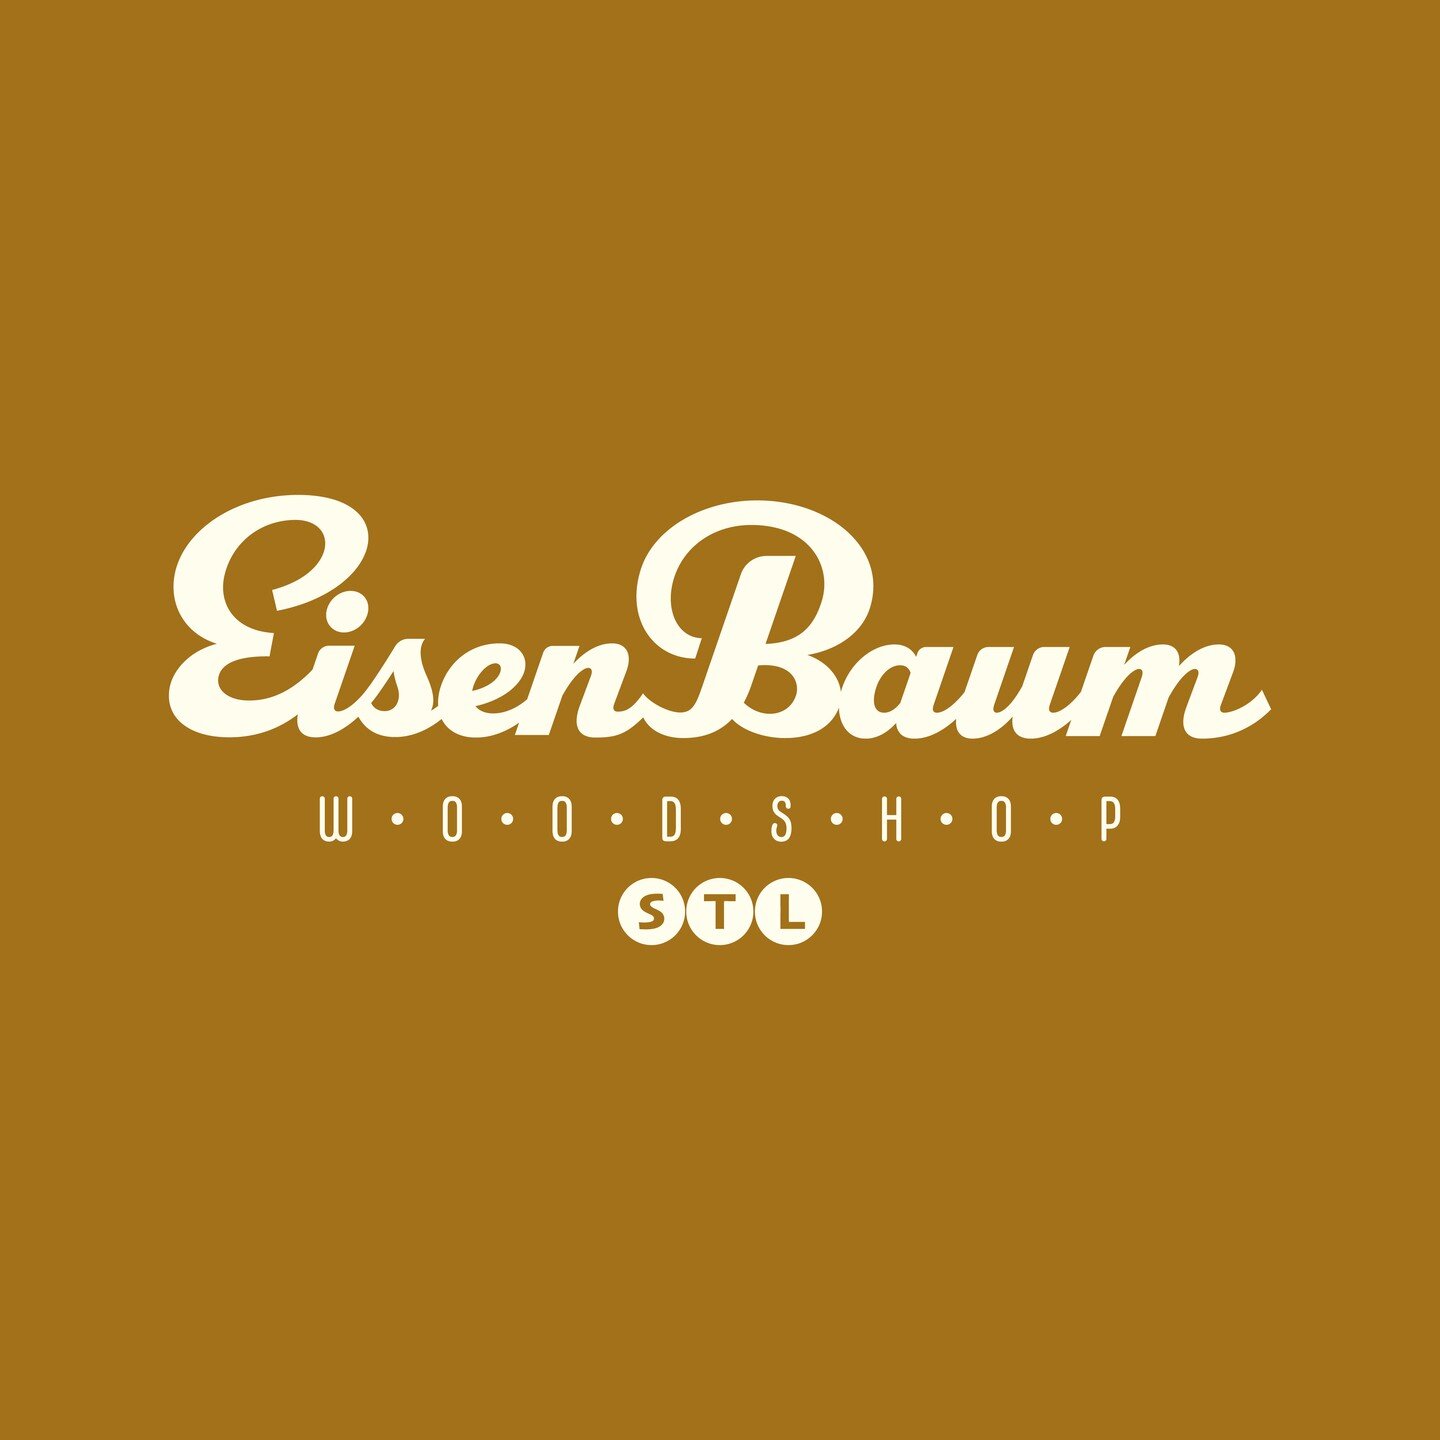 An unchosen concept for @eisenbaumstl. Given only the direction of 'MCM fine crafted furniture' this is where my mind went - A hand-drawn script wordmark that felt very mid-century era specific to some of the old signage for furniture stores. 

The c